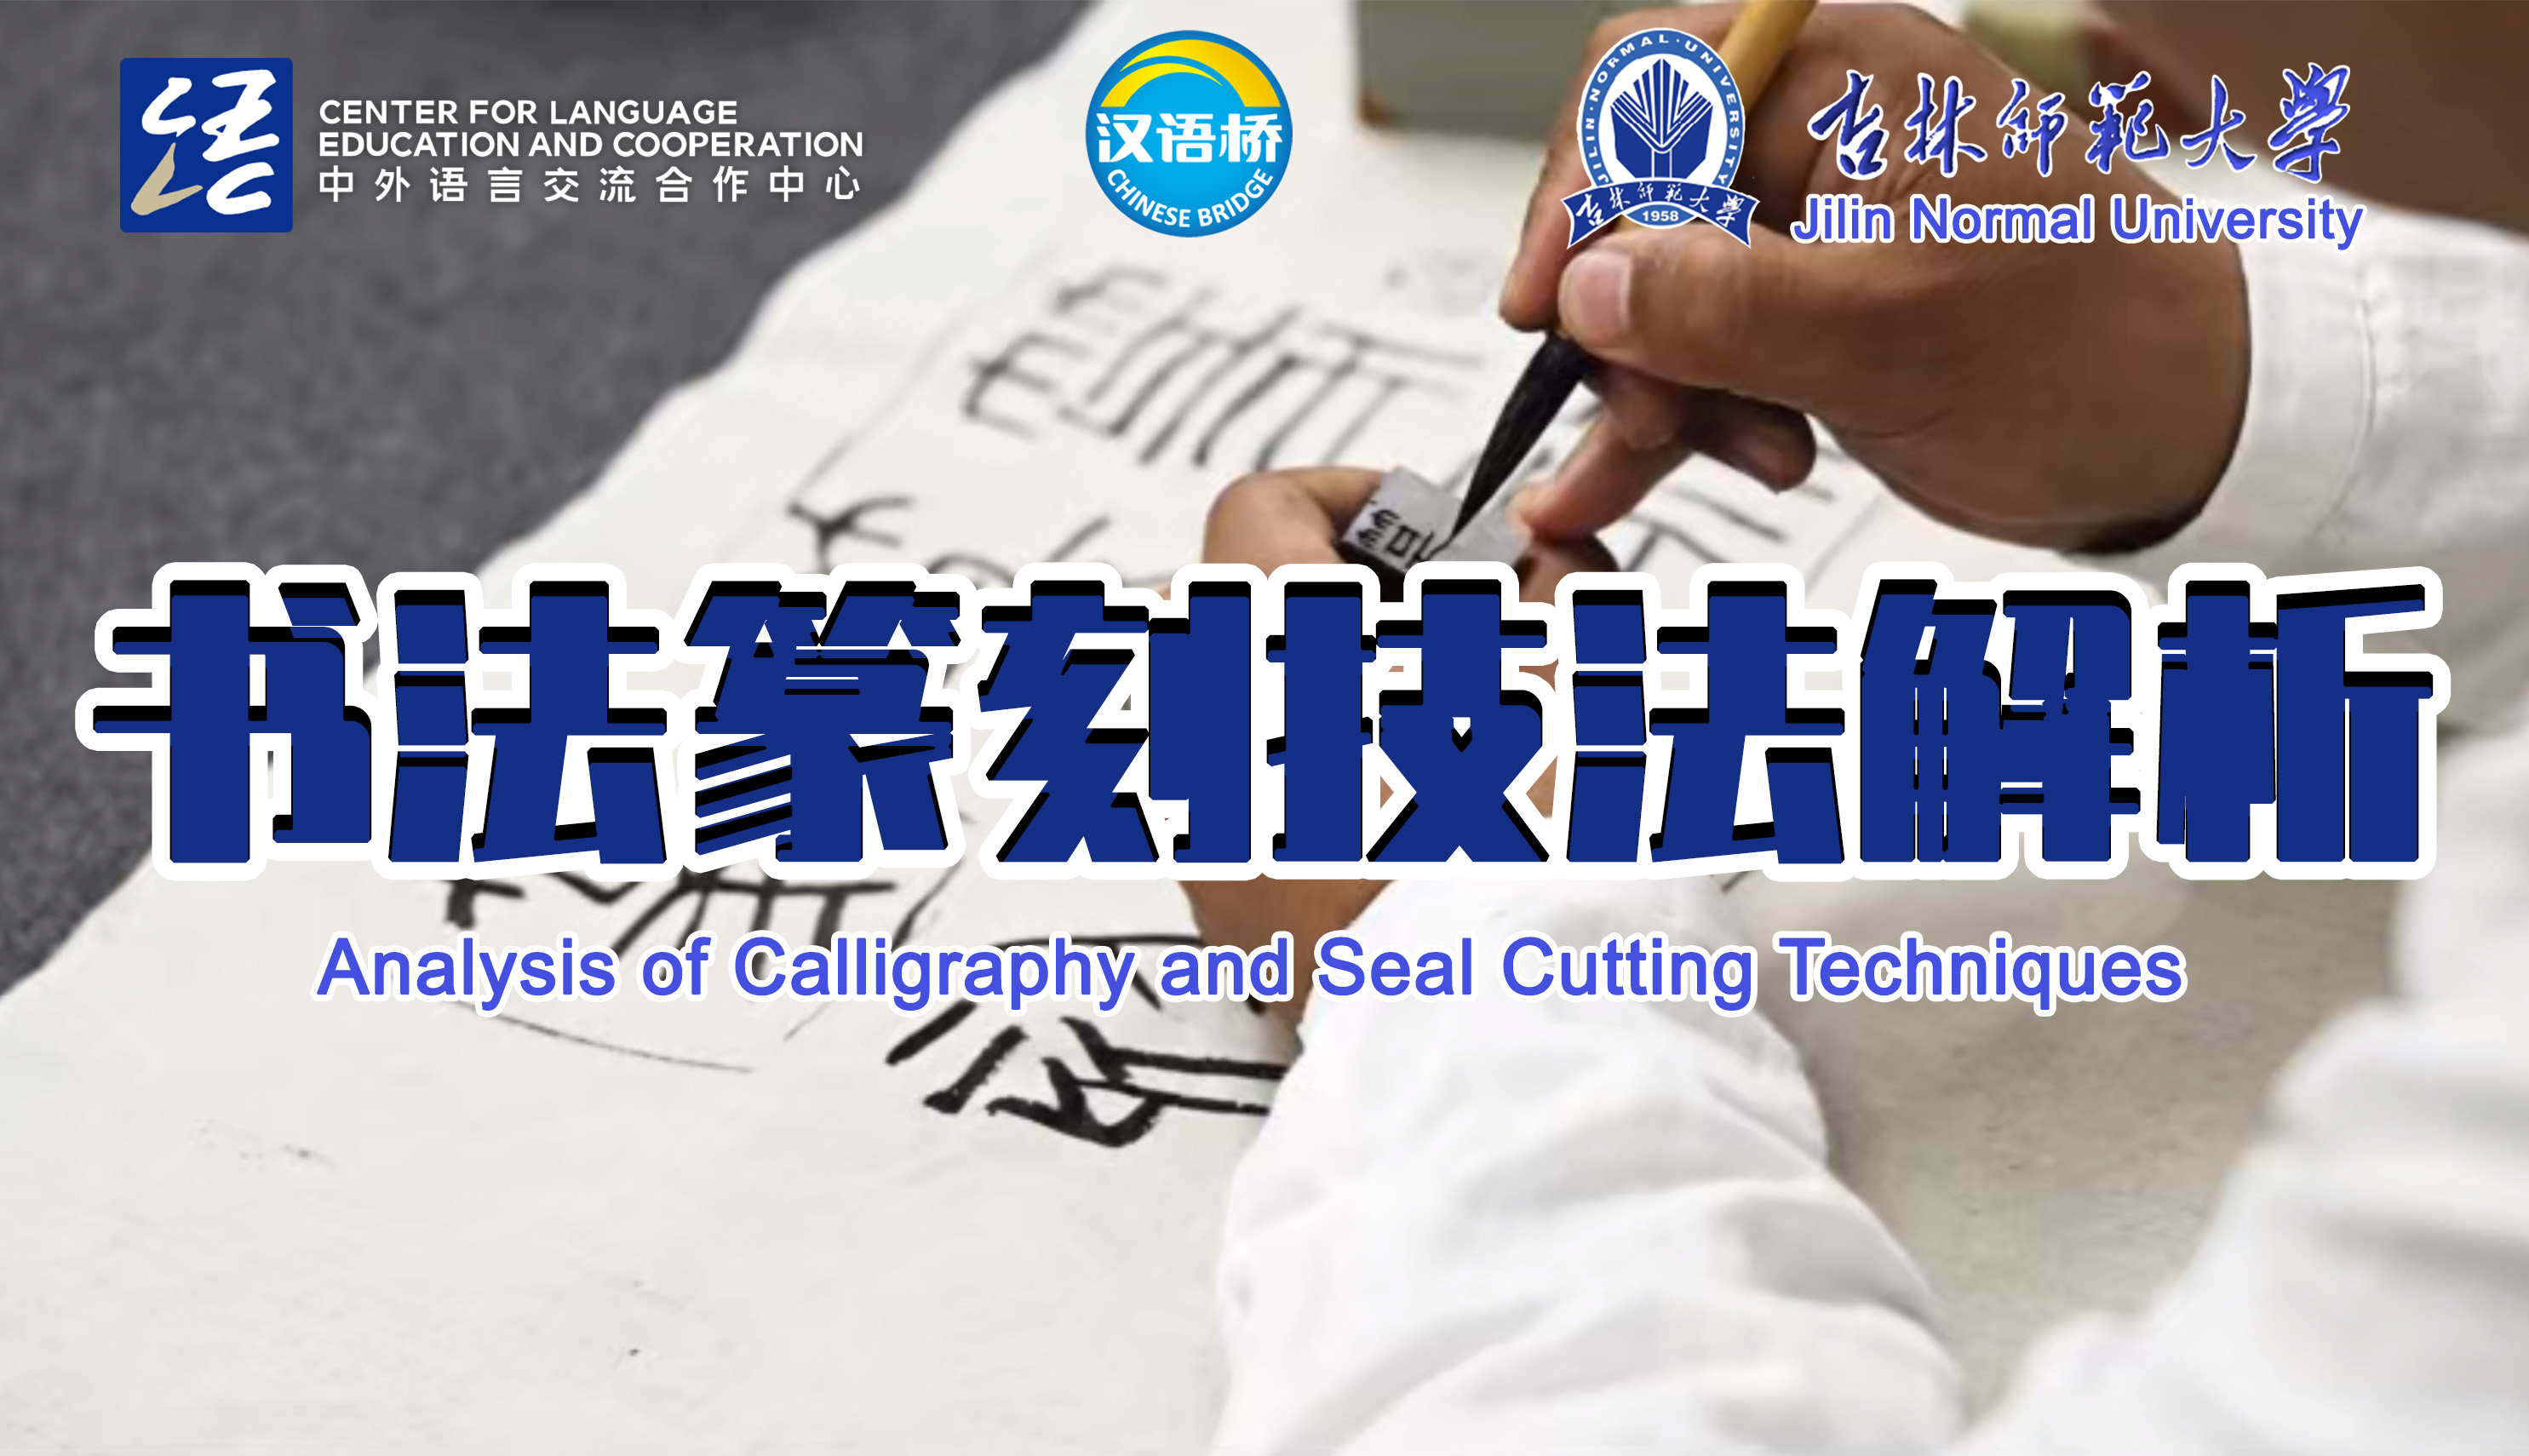 Analysis of Calligraphy and Seal Cutting Techniques